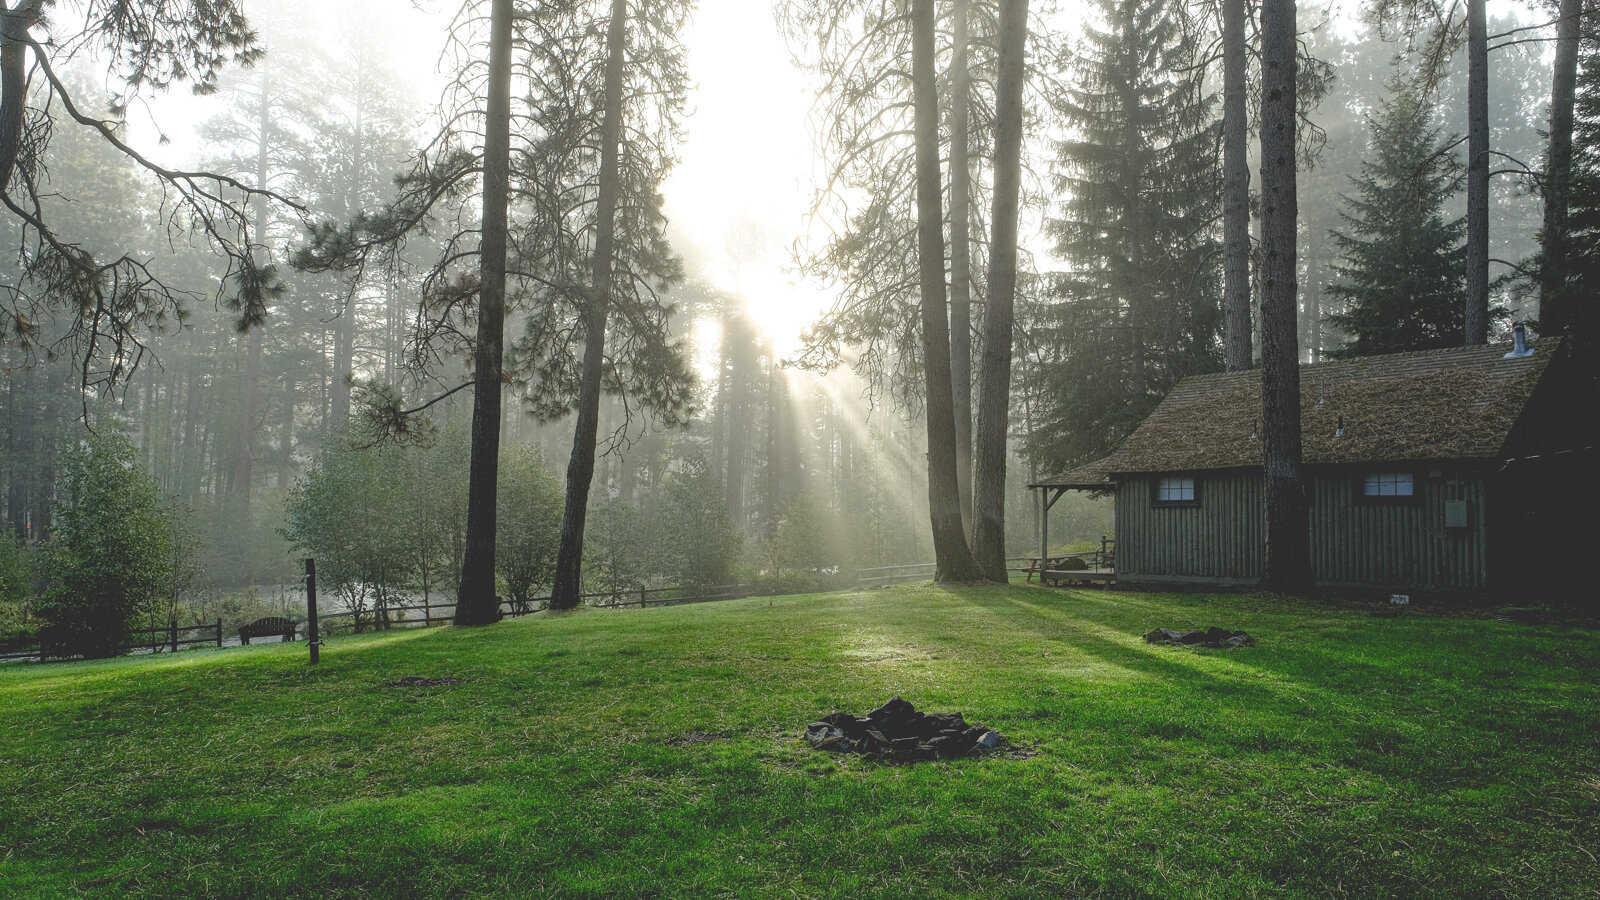 The Historic Log Cabin, at Cold Springs Resort & RV Park, sits blanketed in fog on the banks of the Metolius River in Camp Sherman, Oregon